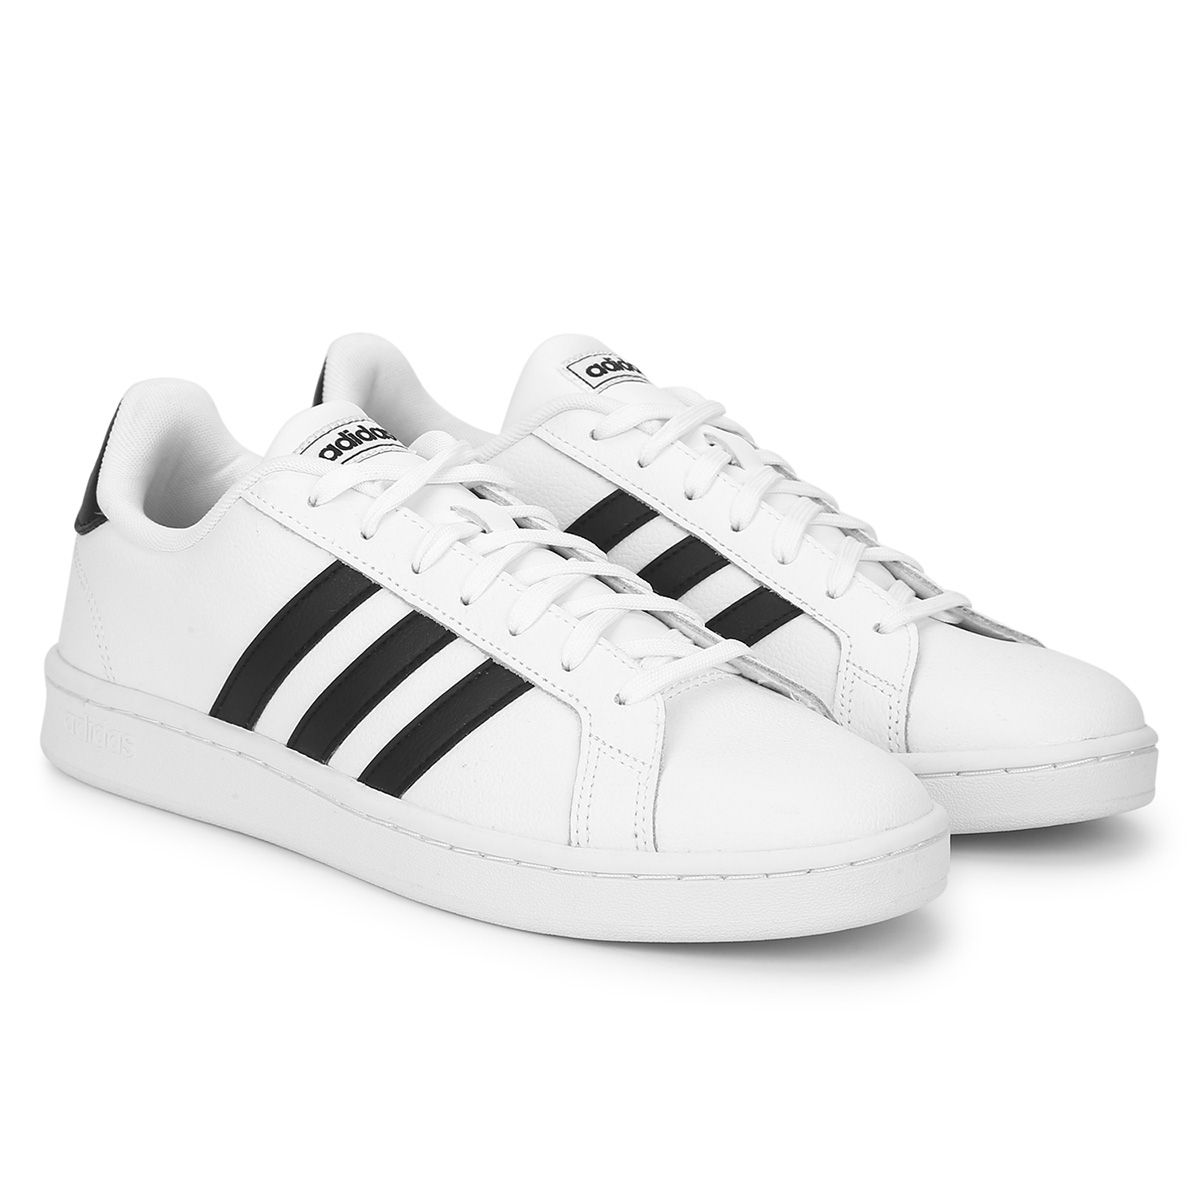 Adidas Grand Court White Tennis Shoes Buy Adidas Grand Court White